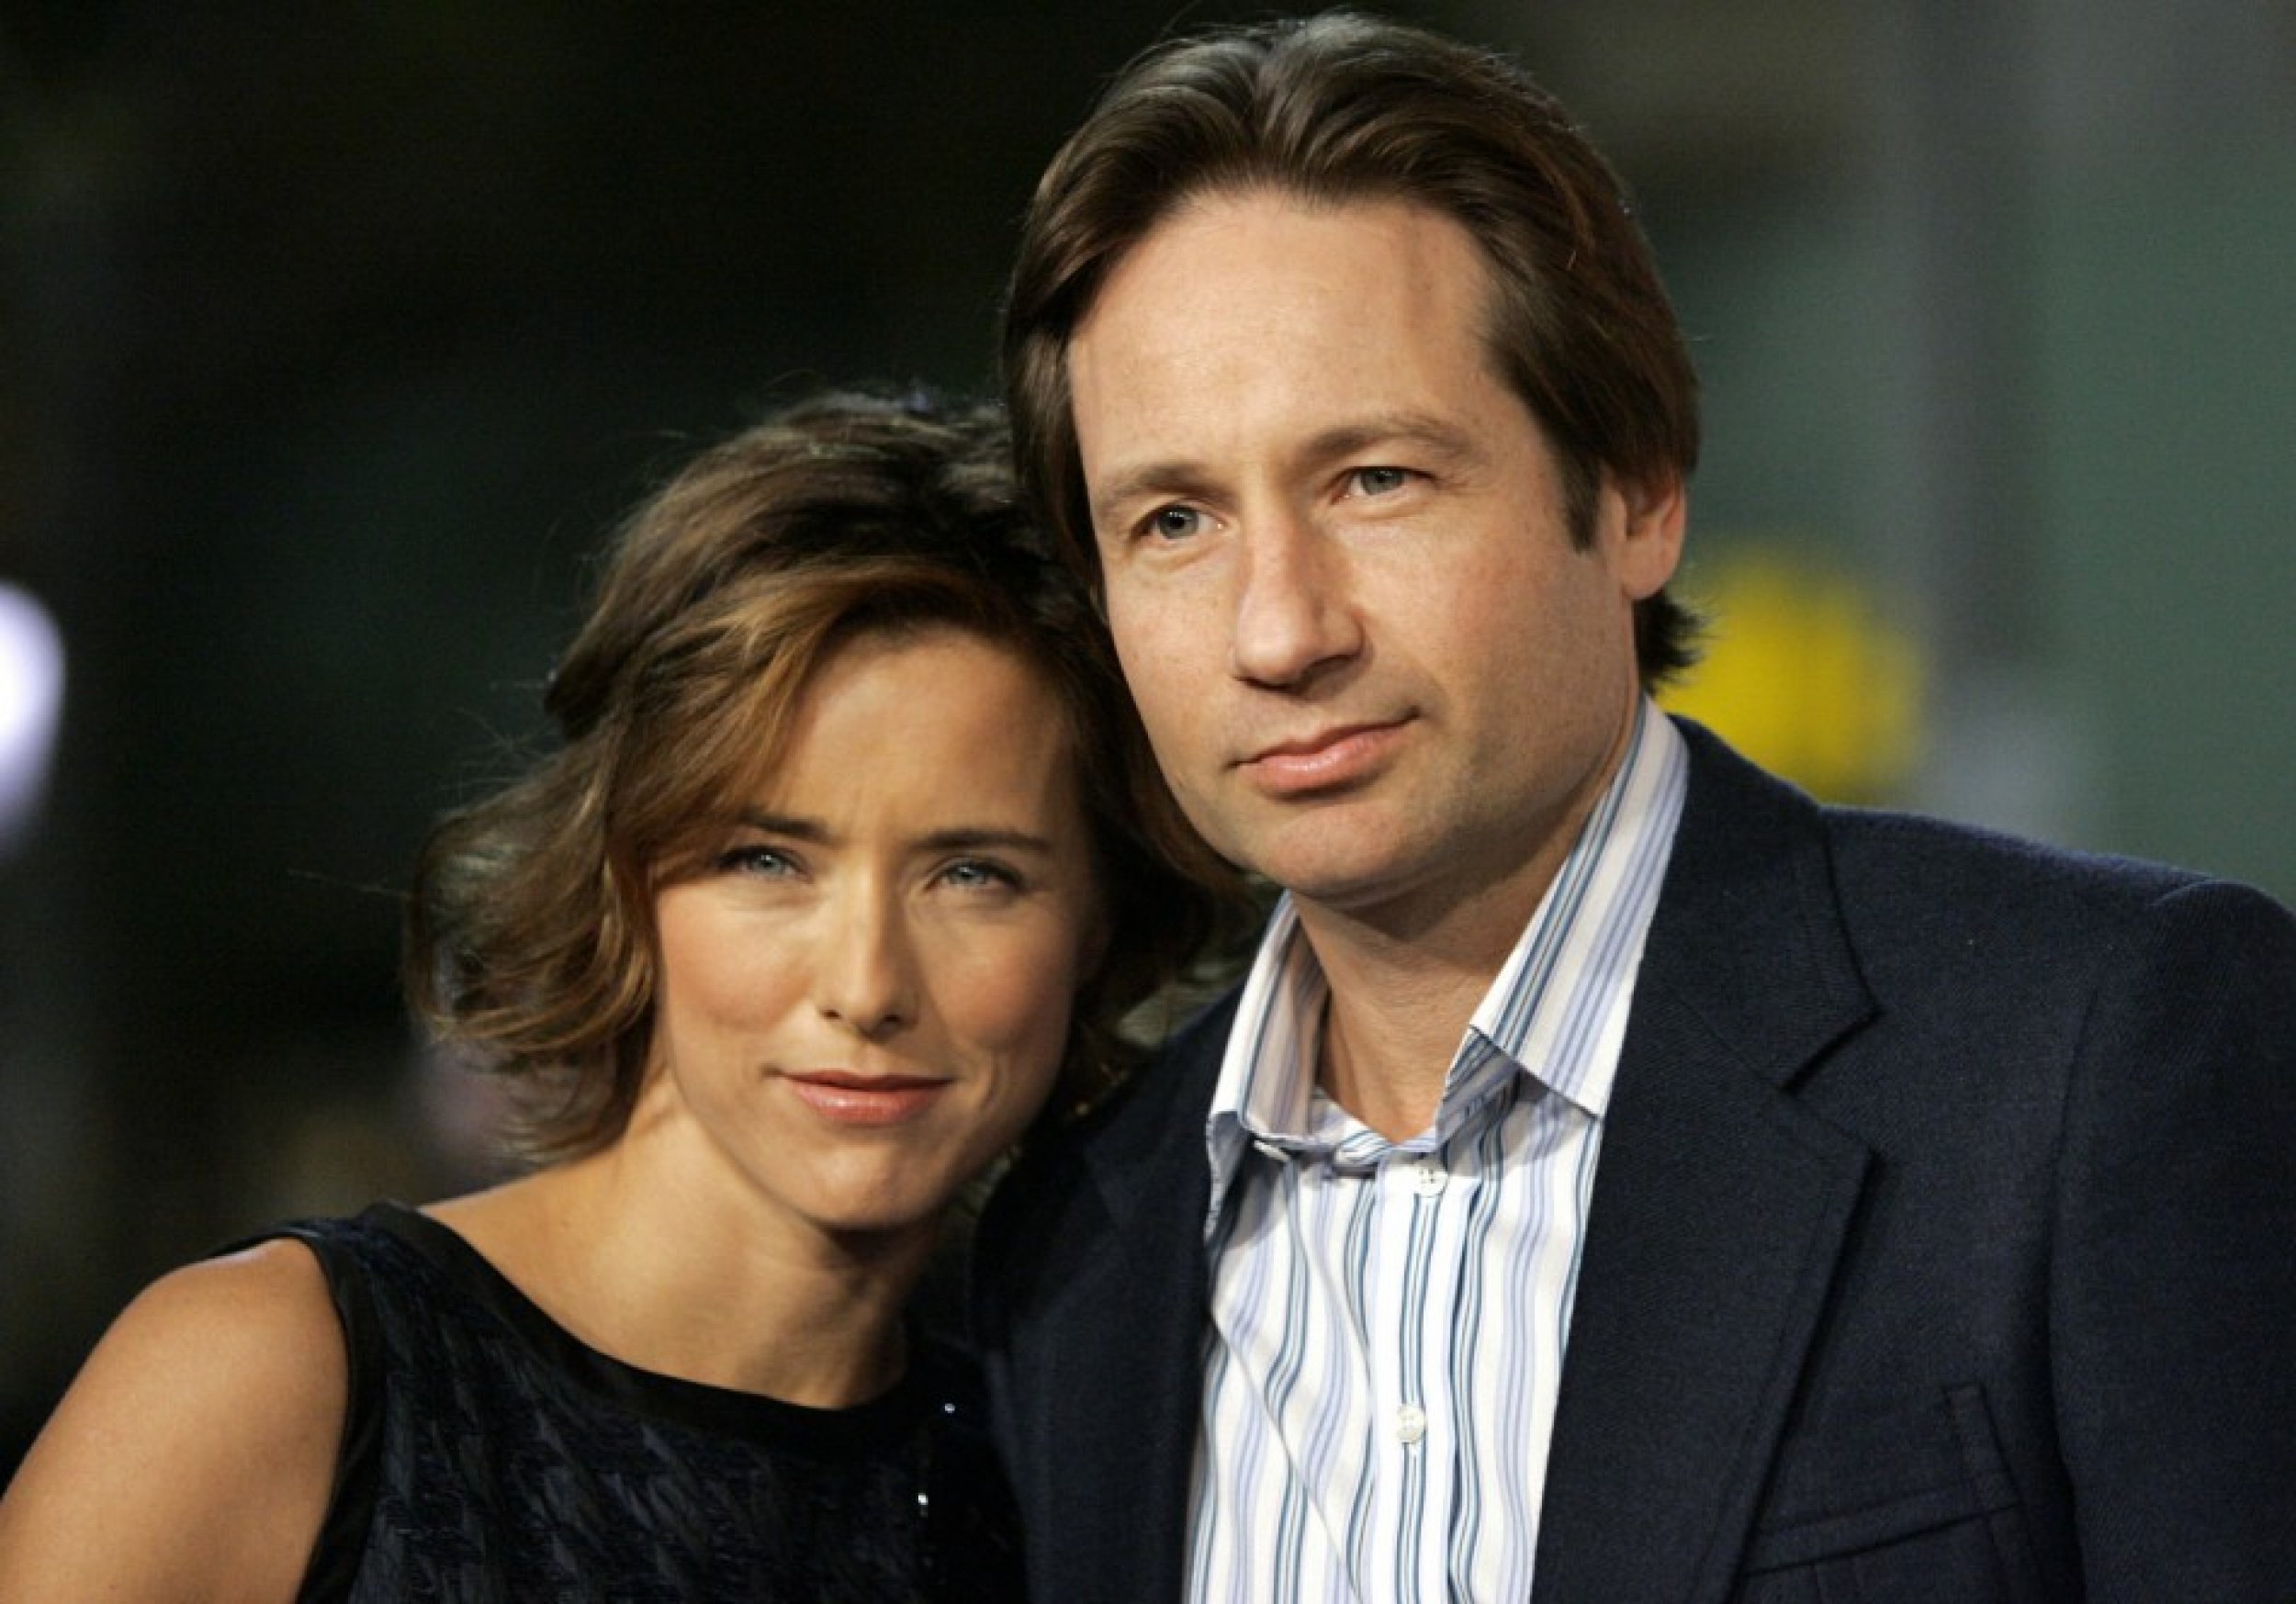 Cast member Tea Leoni and her husband David Duchovny attend the Los Angeles premiere of Columbia pictures039 quotFun with Dick and Janequot at the Mann Village theatre in Los Angeles December 14, 2005.